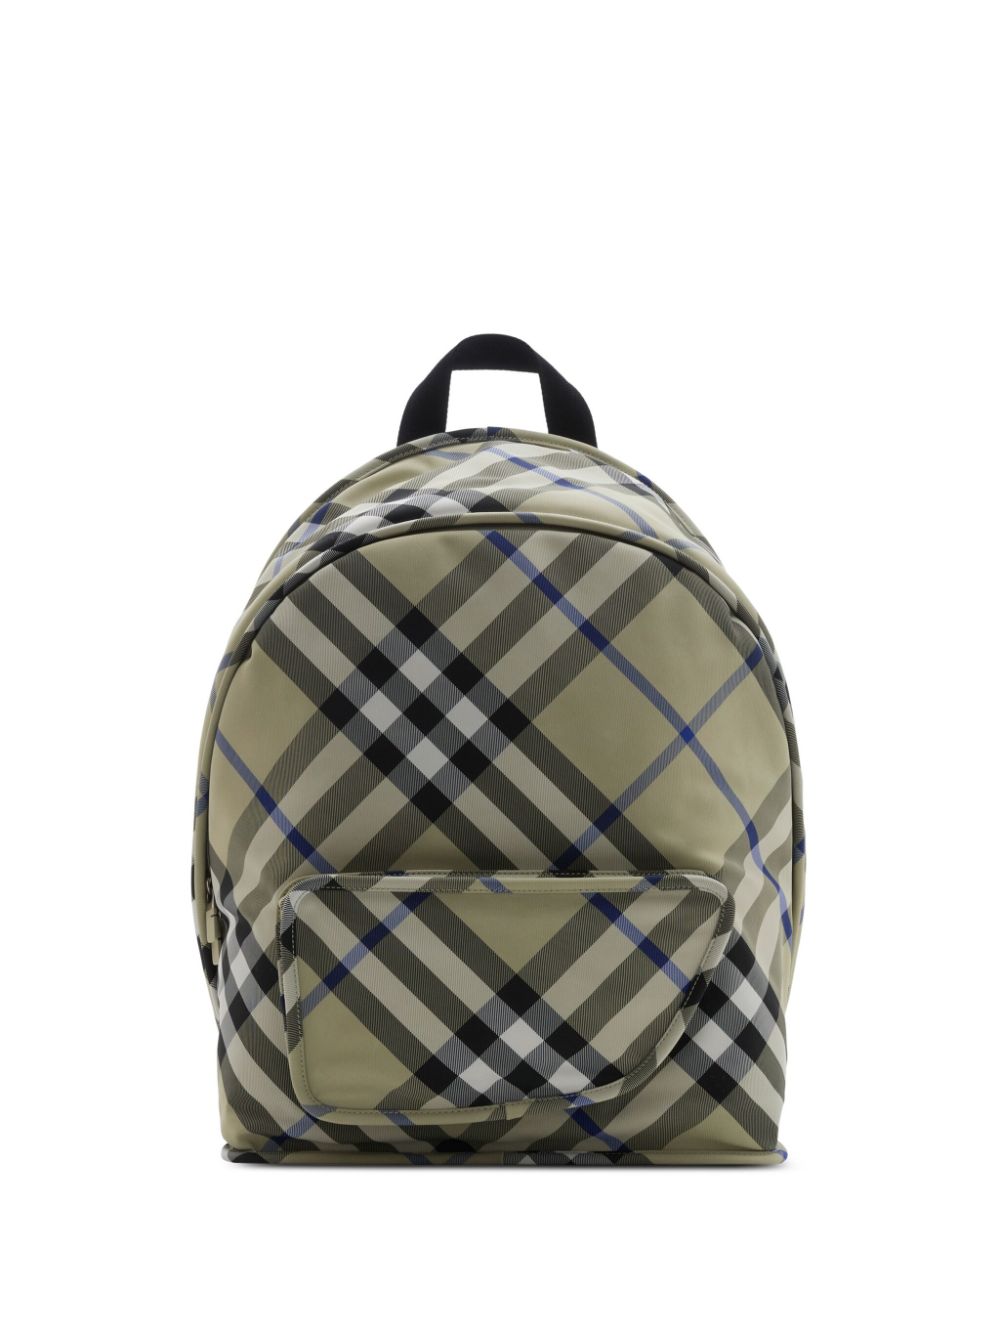 Burberry check-print backpack - Green von Burberry